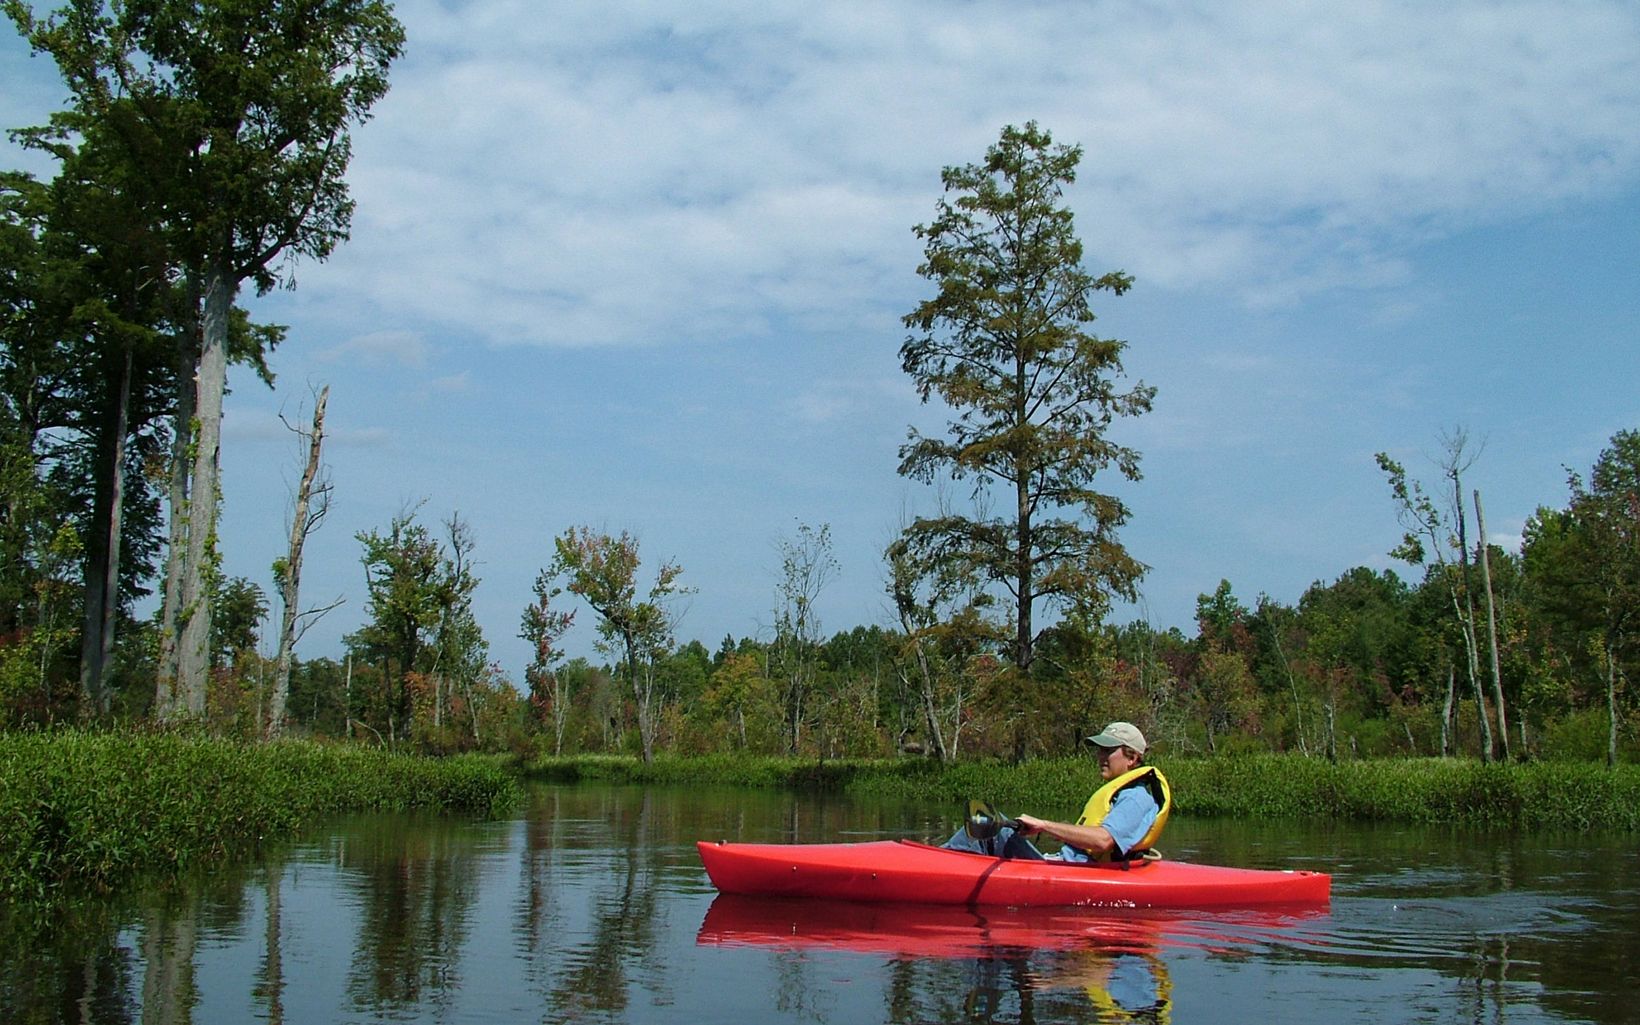 A man in a yellow life vest floats in a red kayak. Green floating vegetation lines the banks with tall trees in the background.